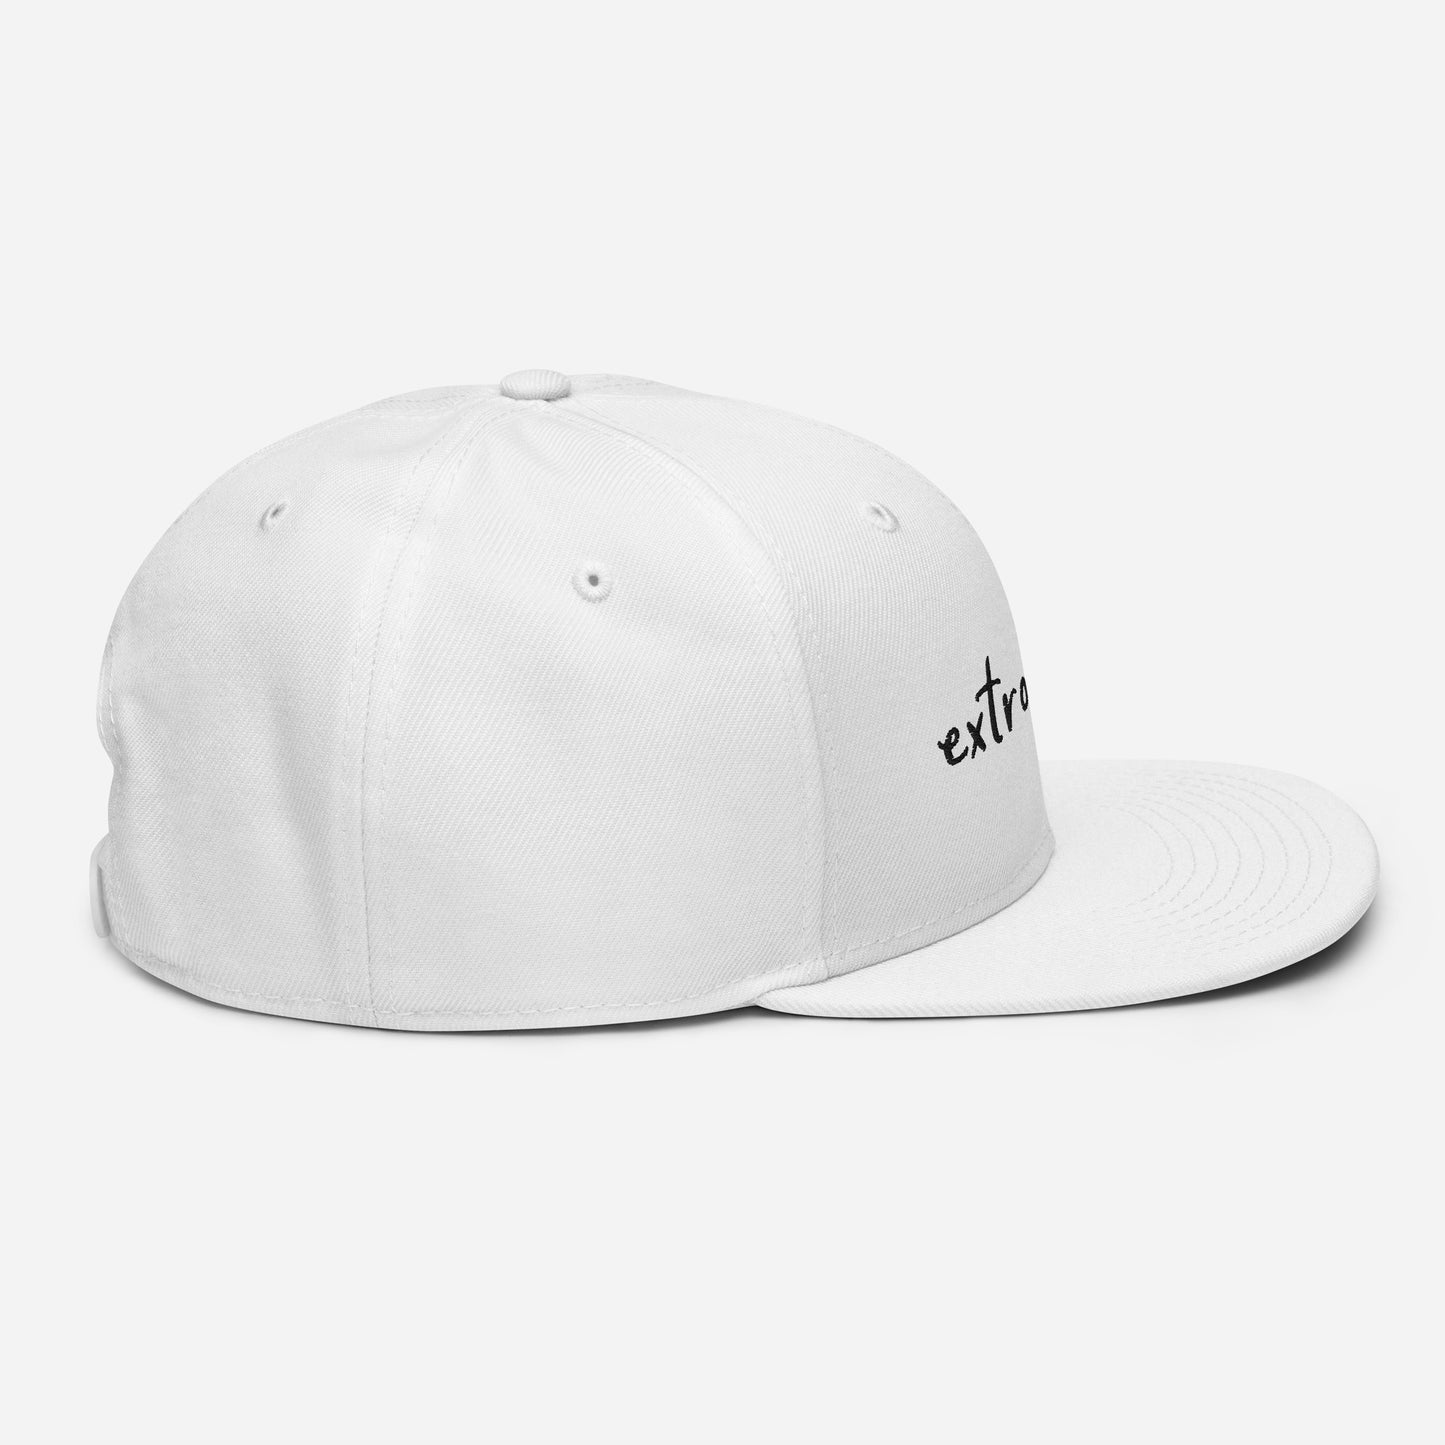 Embroidered snapback hat "extrovert"